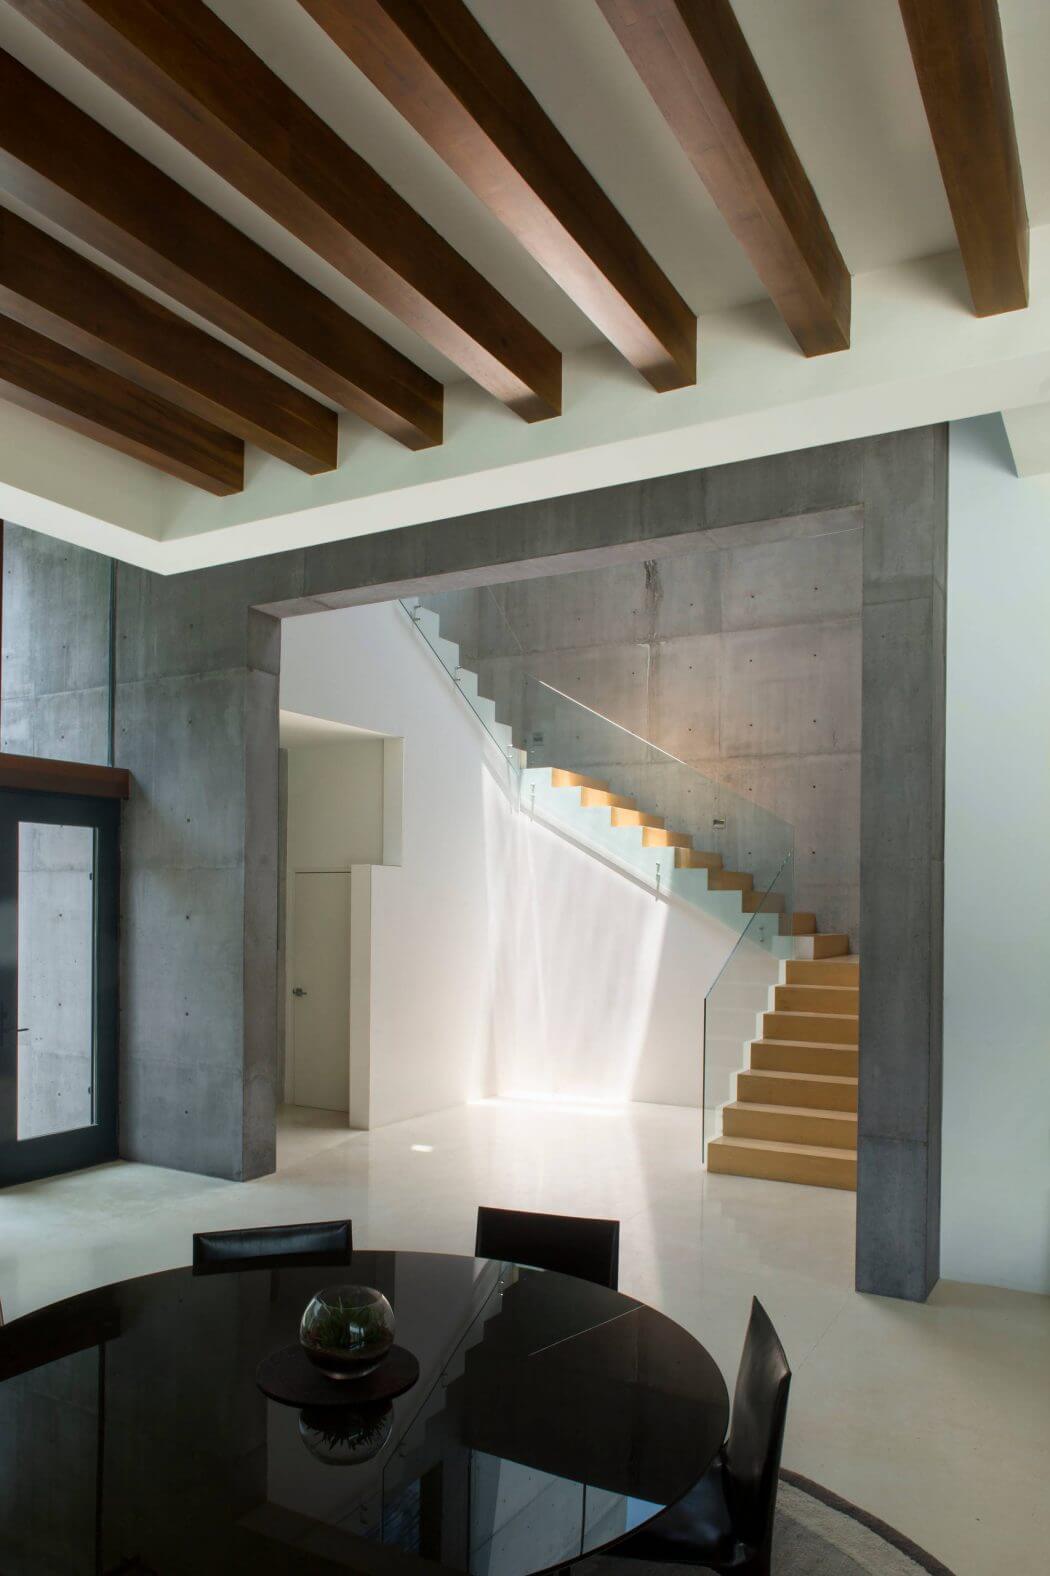 Elegant modern interior with concrete walls, wooden ceiling beams, and glass staircase.